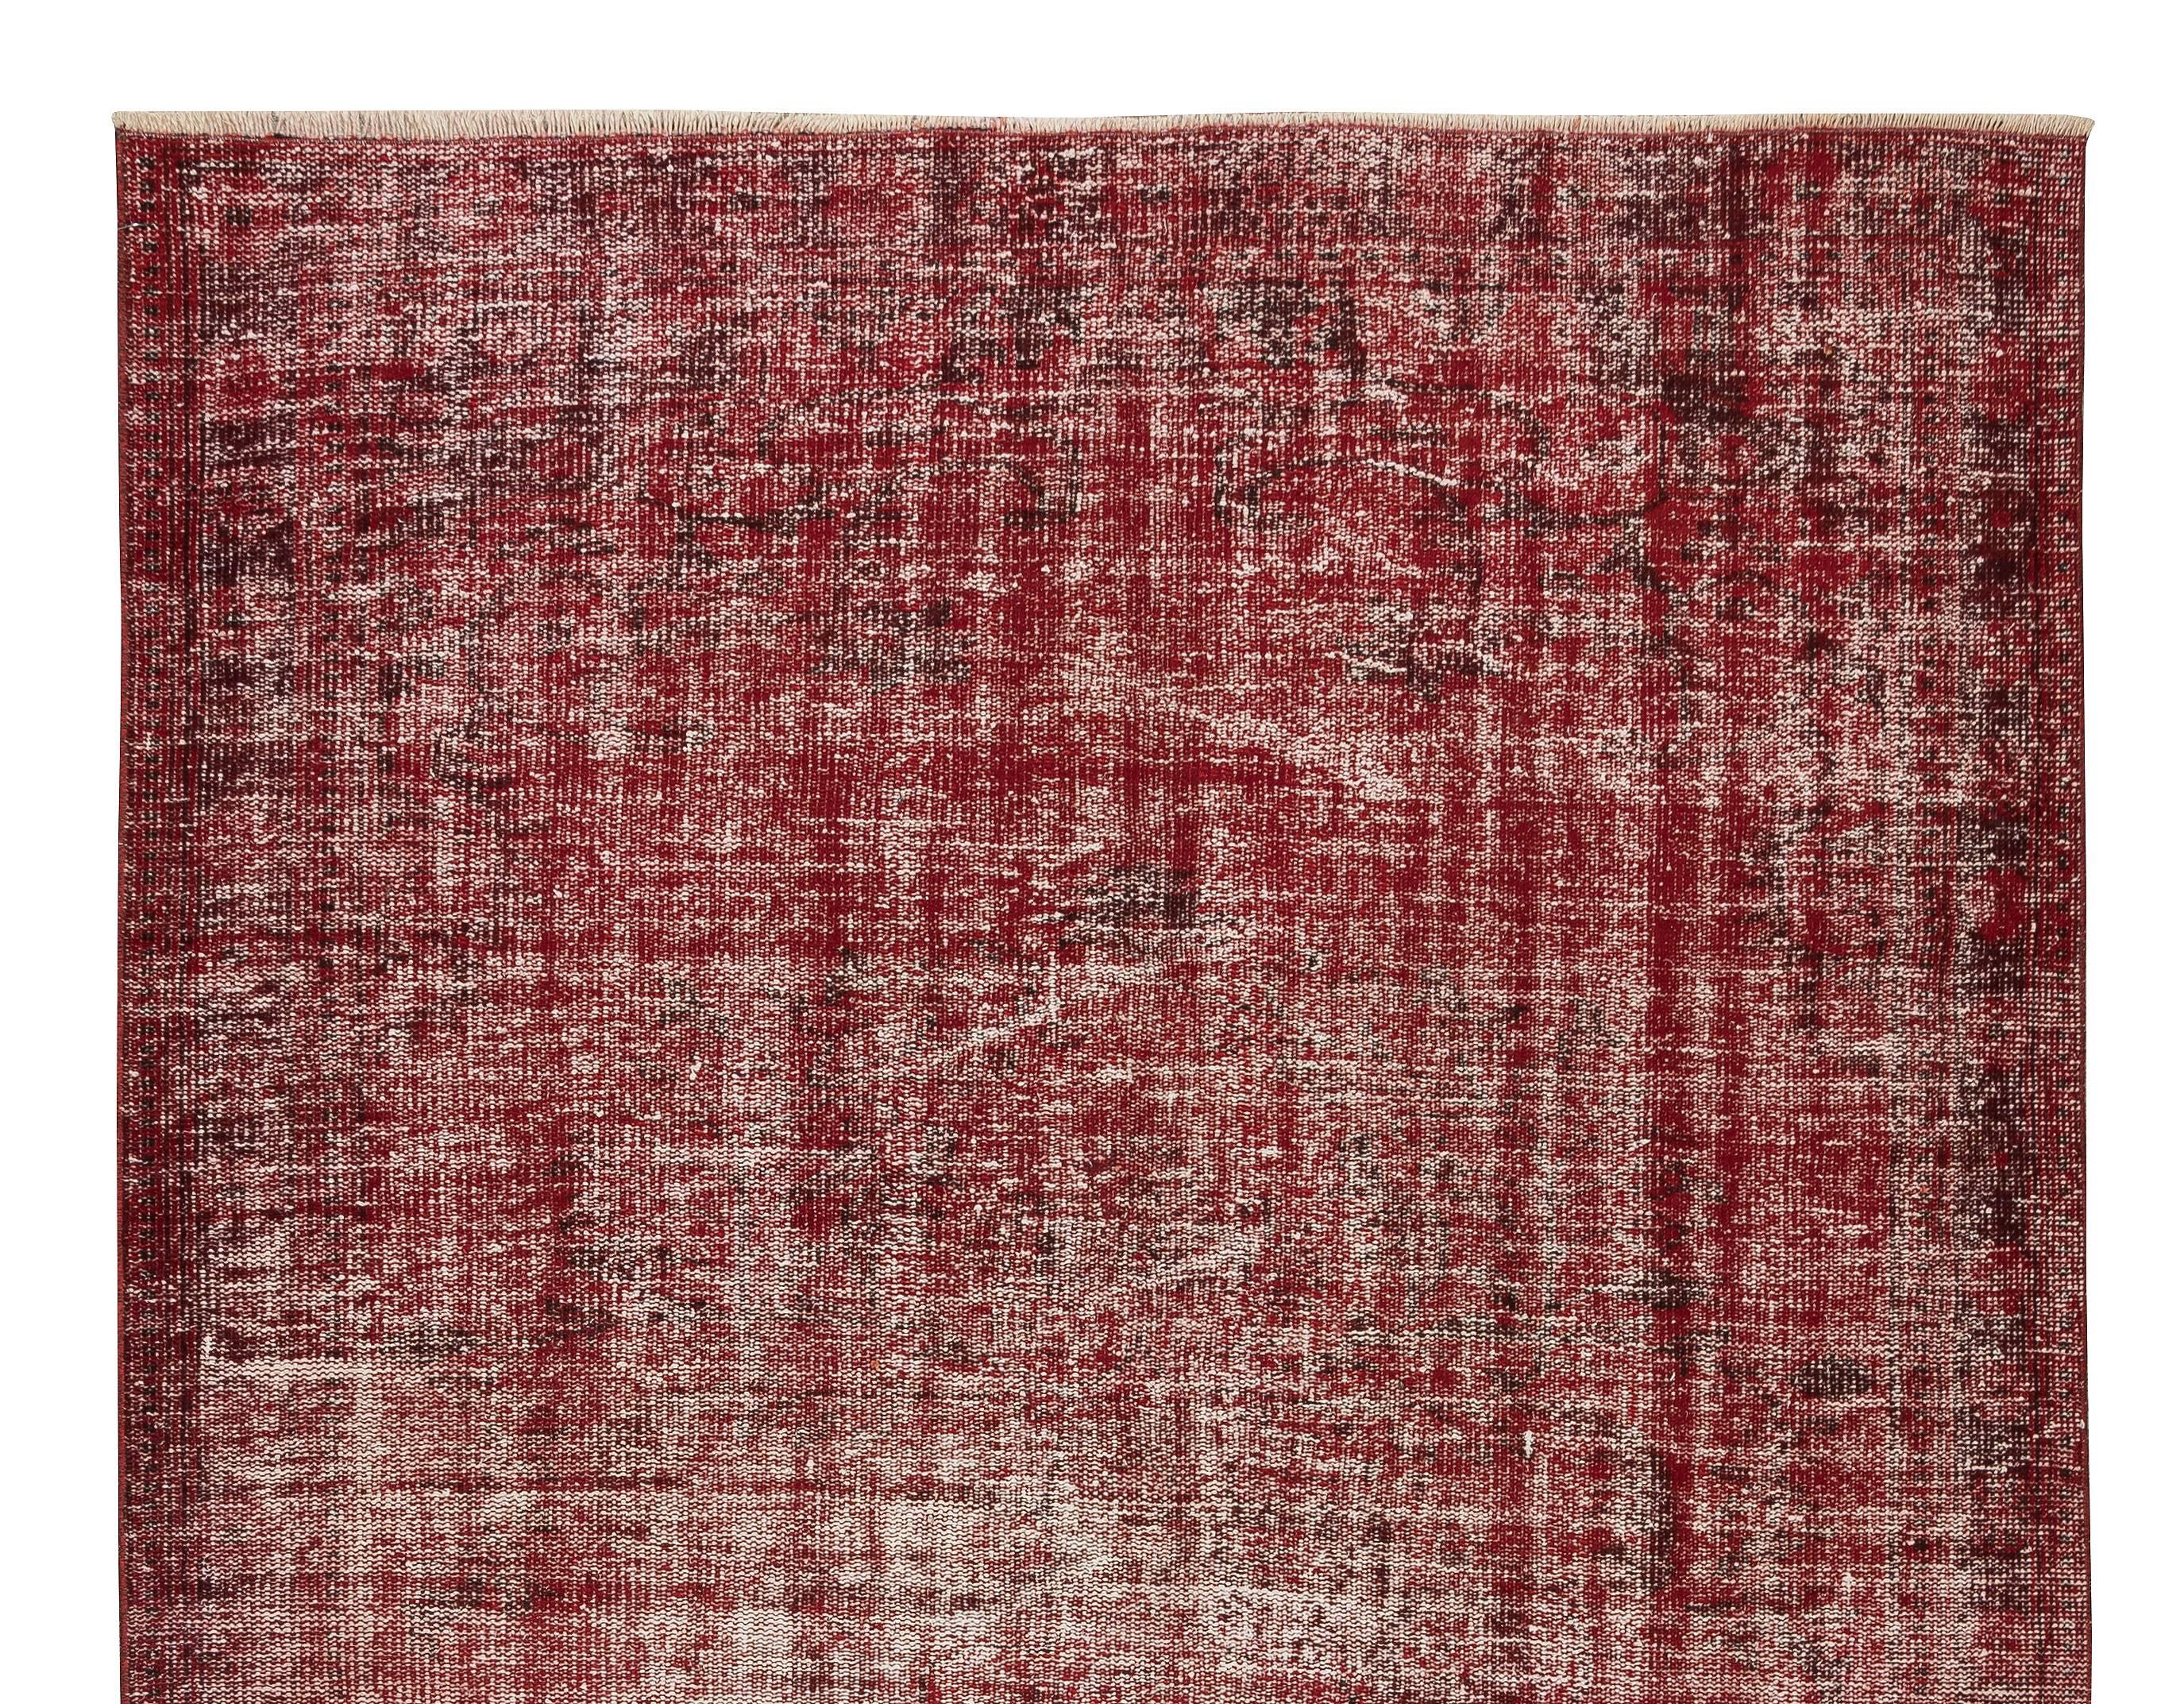 Hand-Knotted Turkish Burgundy Red Rug, Shabby Chic Floor Covering, Handmade Carpet For Sale